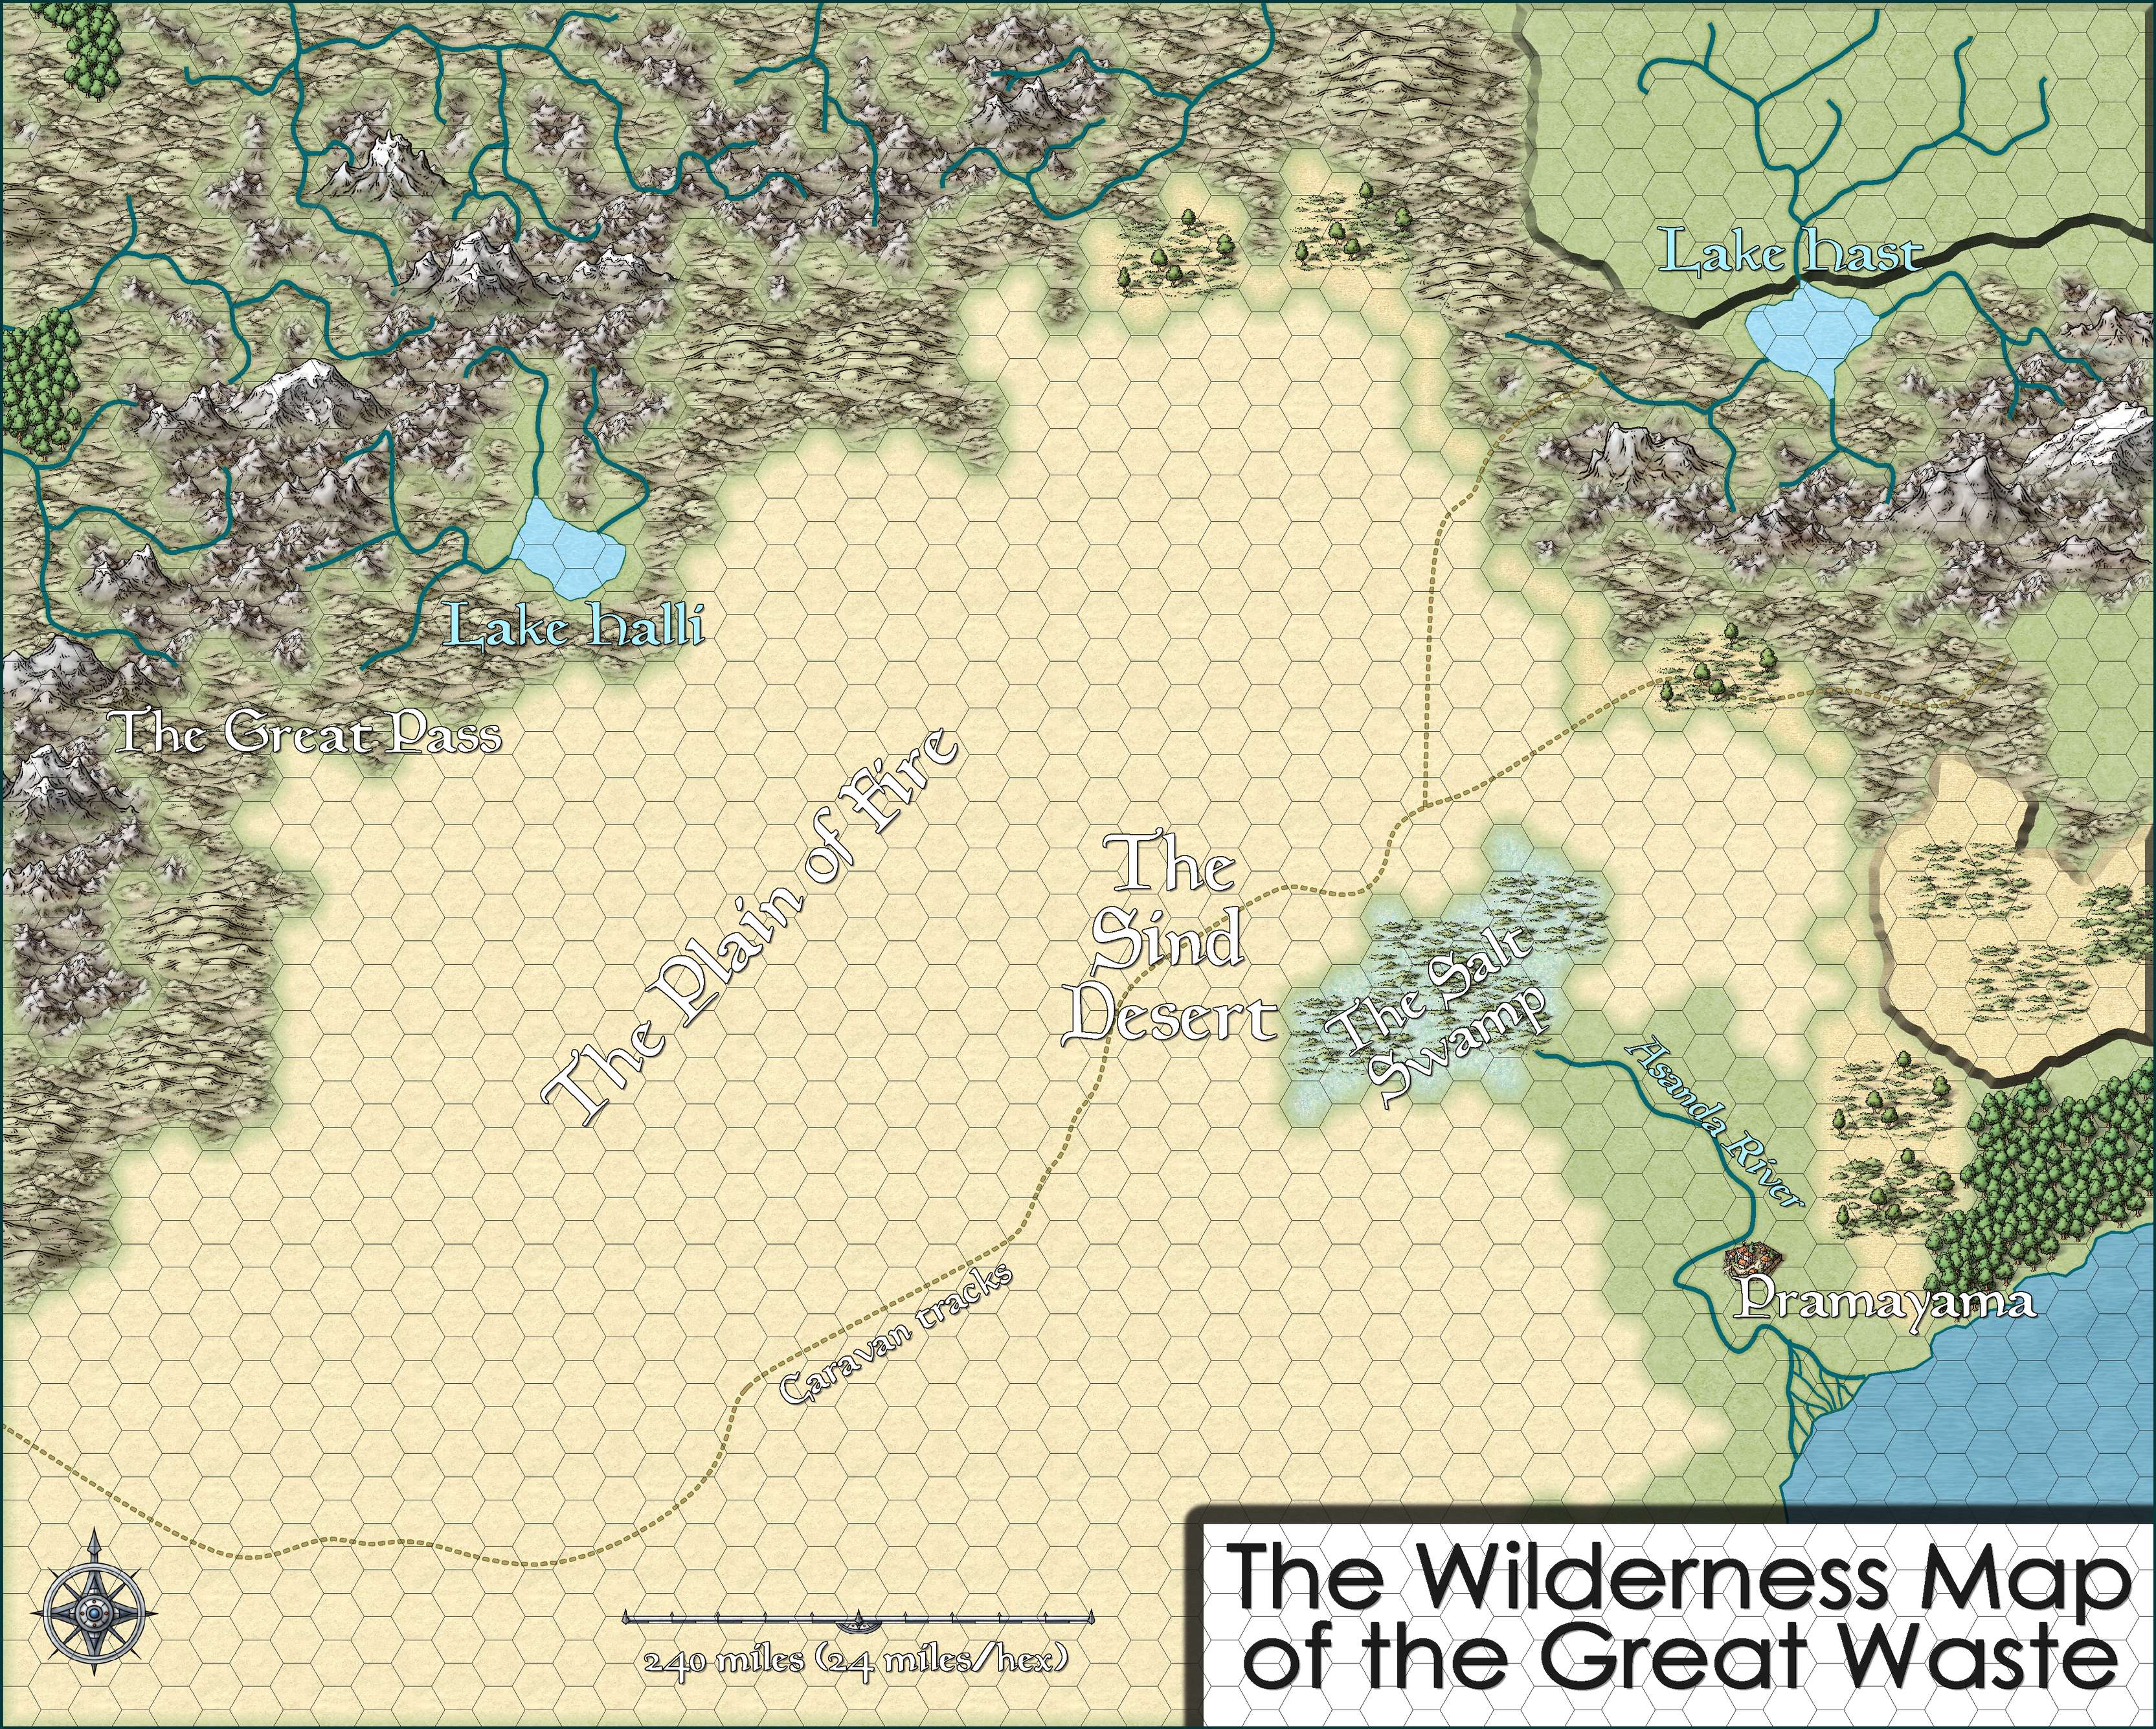 Wilderness map of the Great Waste, 24 miles per hex by Jason Hibdon, February 2021